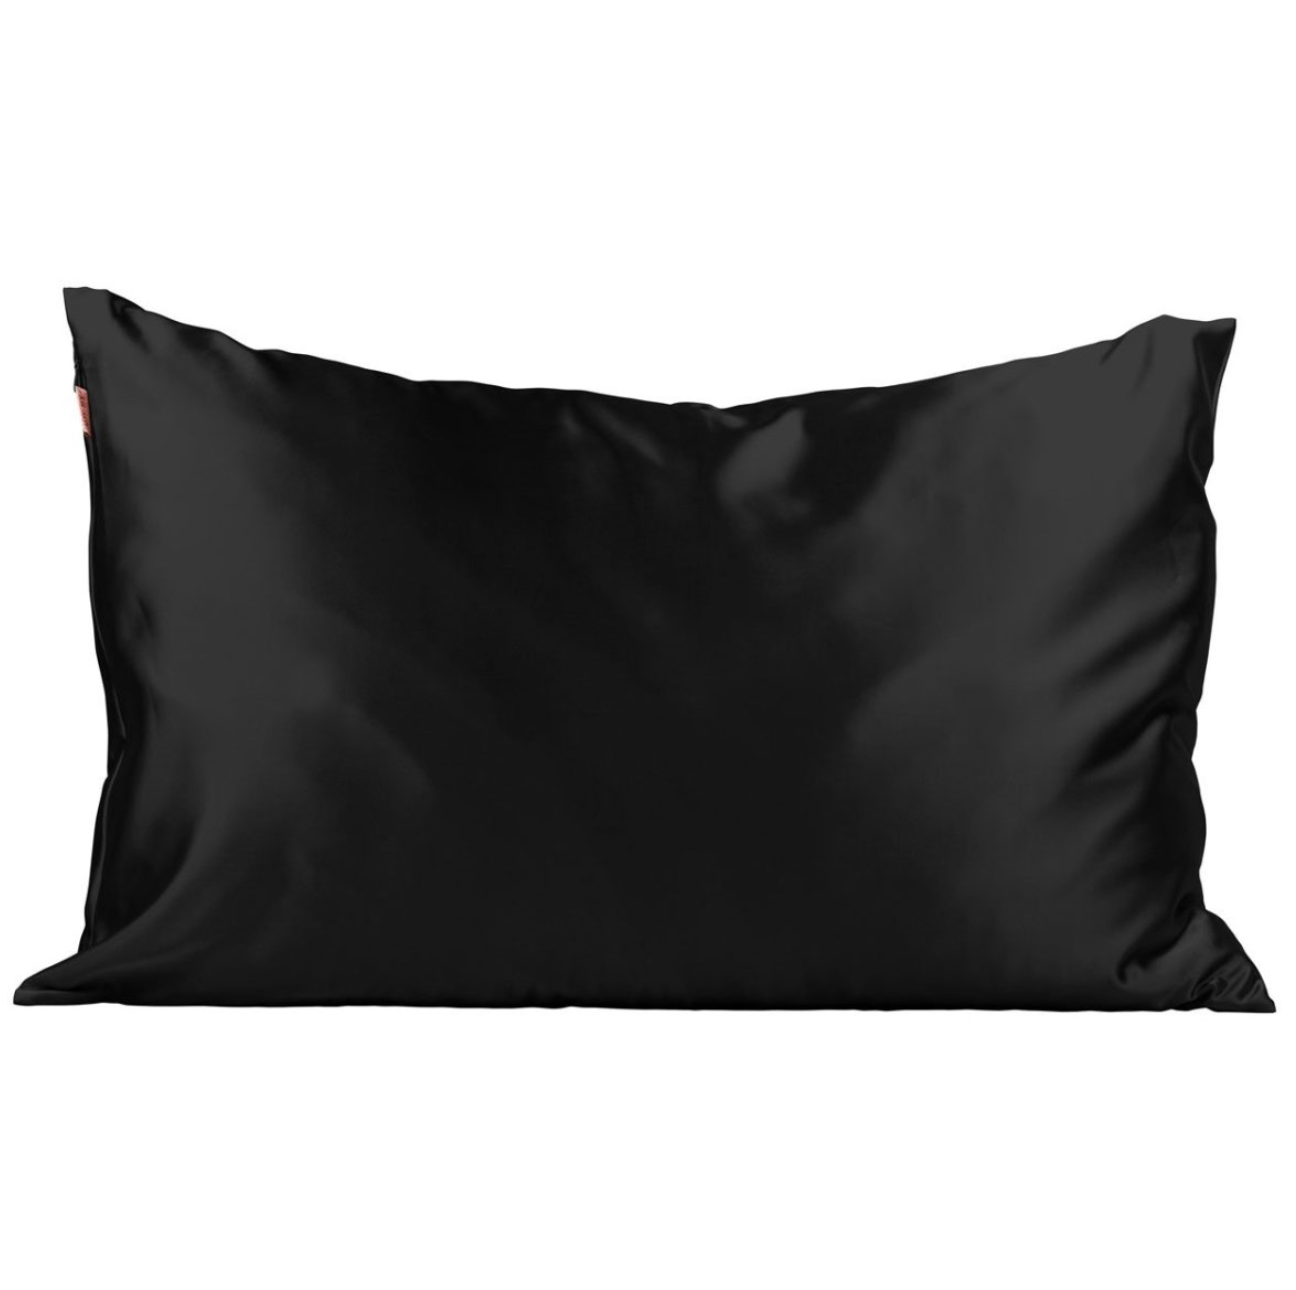 Load image into Gallery viewer, Satin Pillowcase - Black
